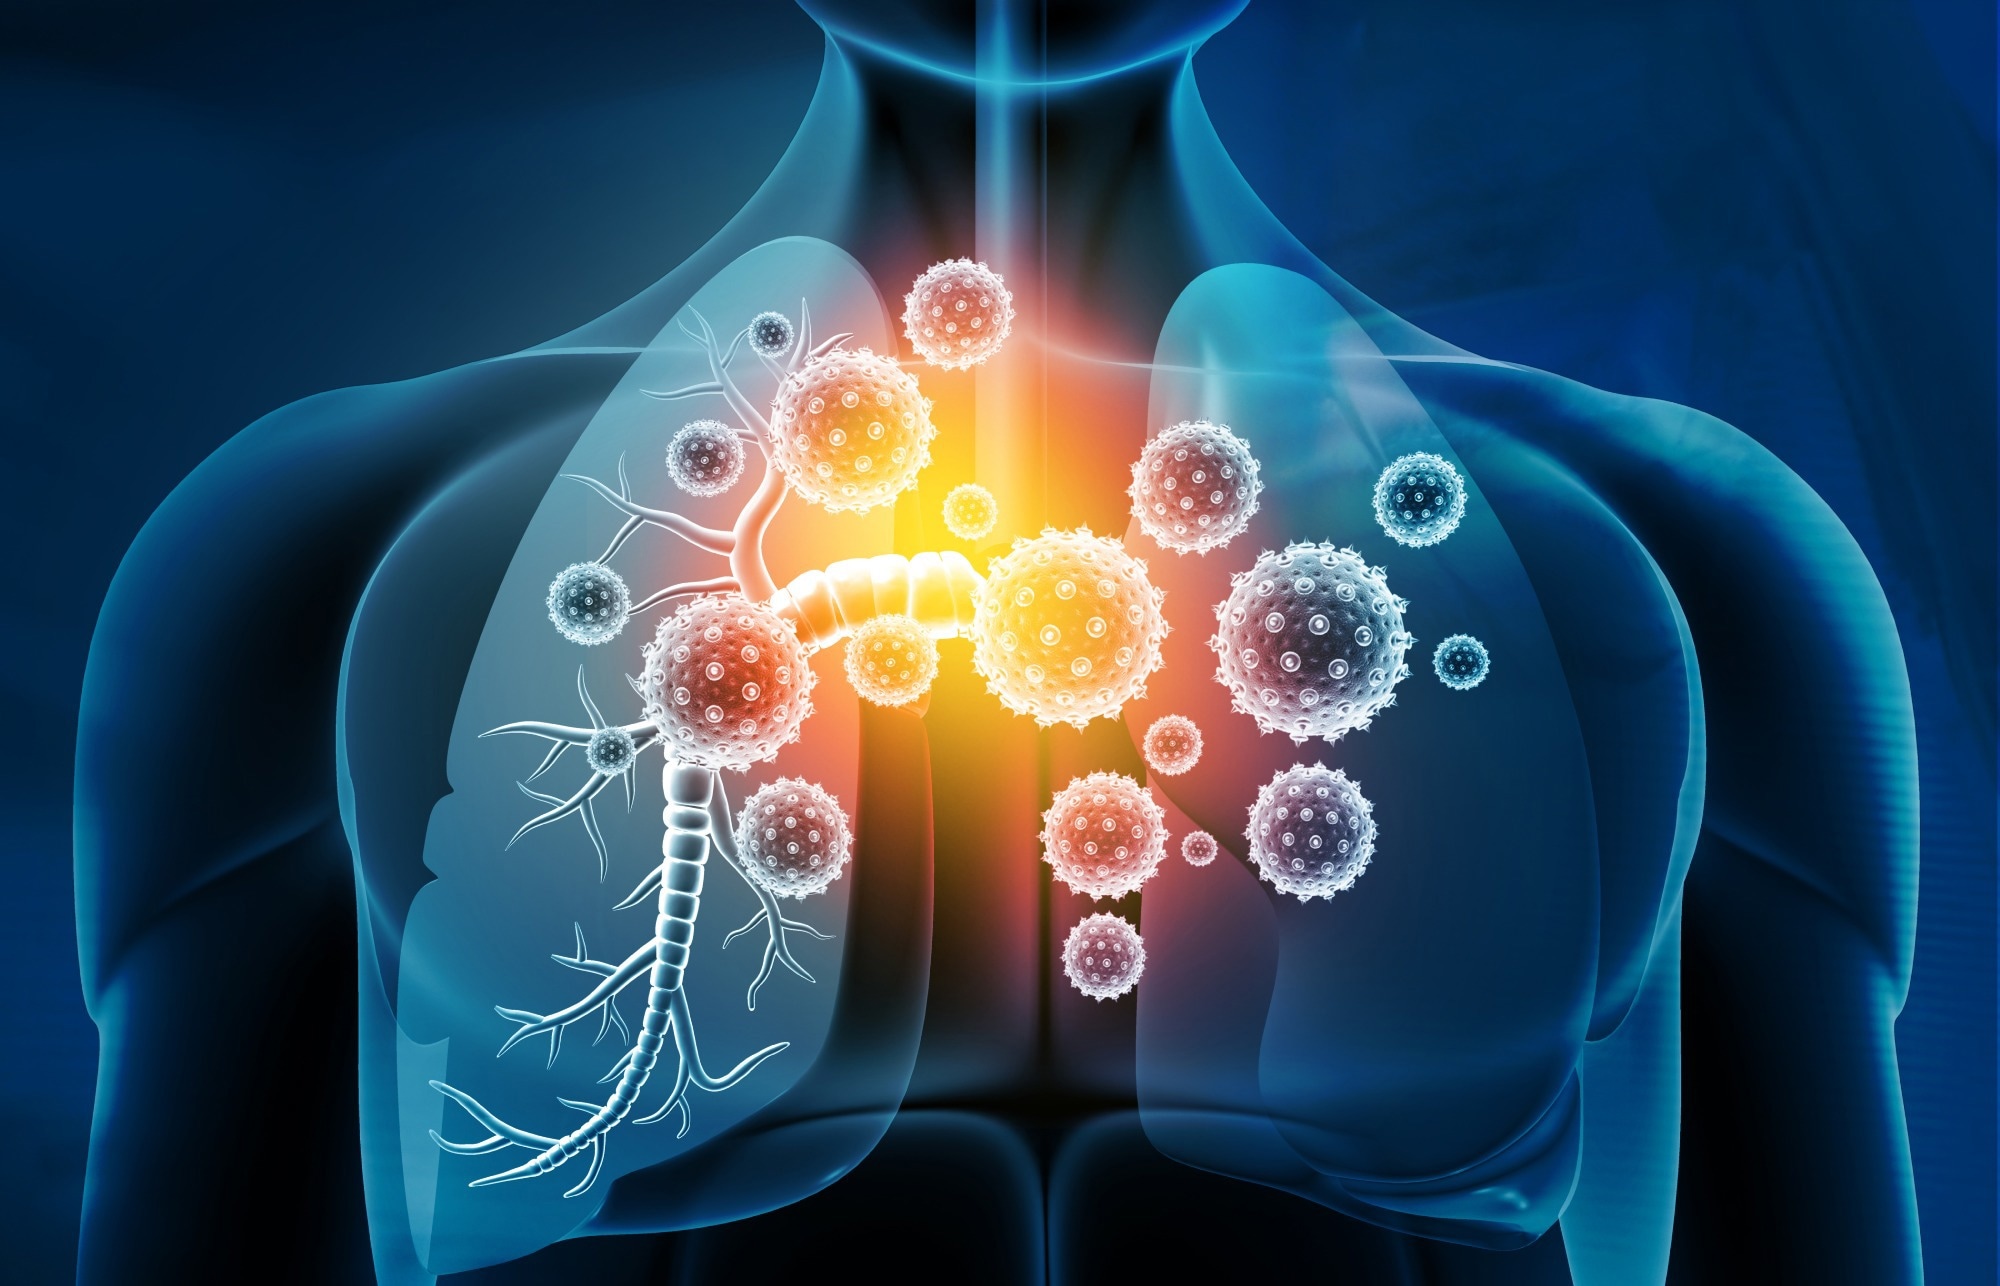 Study: COVID-Specific Long-Term Sequelae in Comparison to Common Viral Respiratory Infections: An Analysis of 17,487 Infected Adult Patients. Image Credit: Explode/Shutterstock